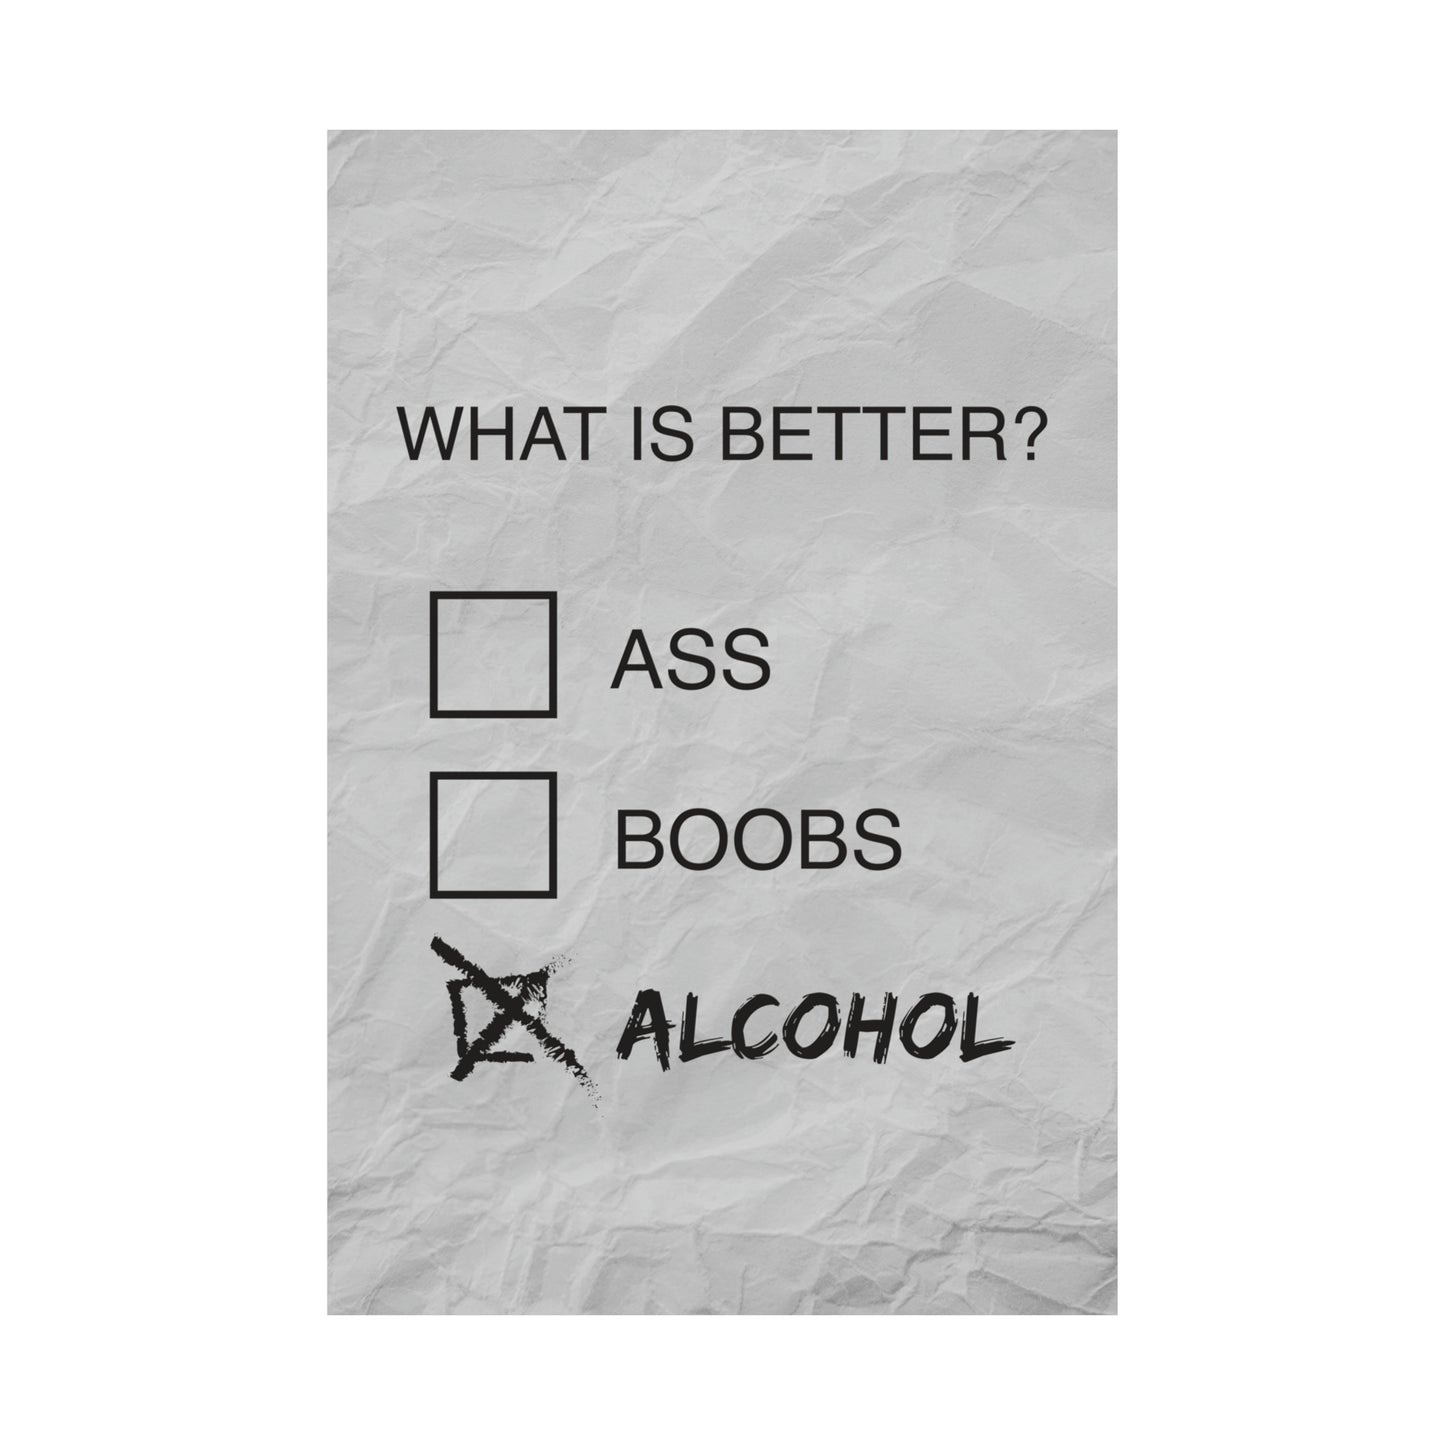 Alcohol is Always Better, College Poster